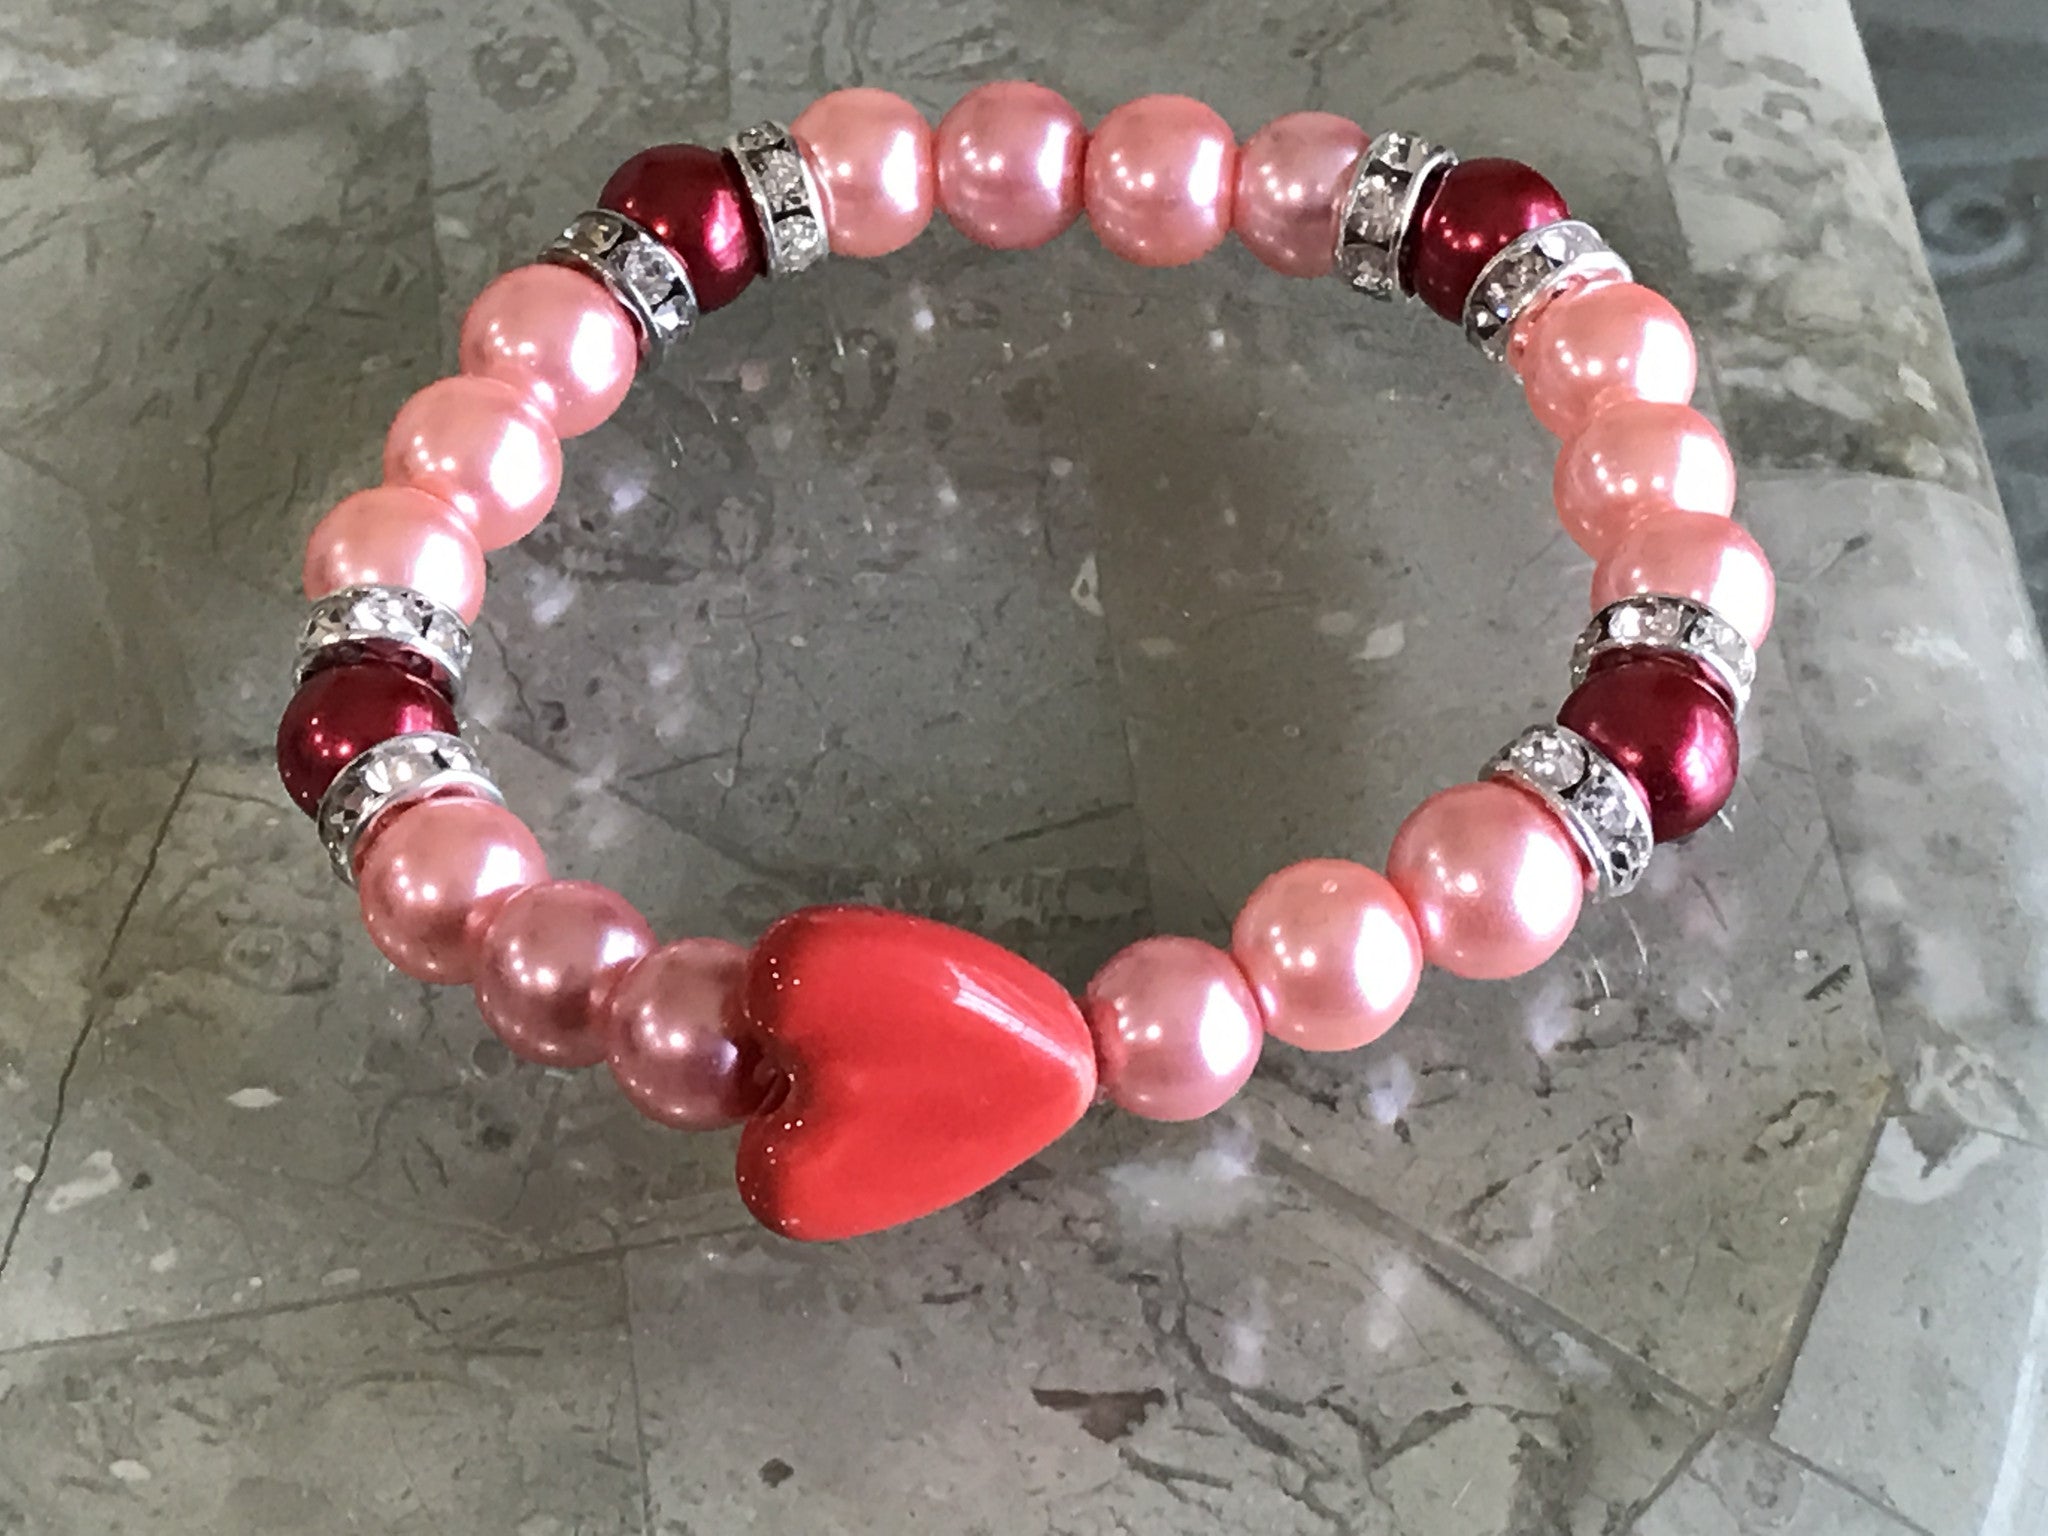 Pink pearl glass beads with red ceramic heart charm